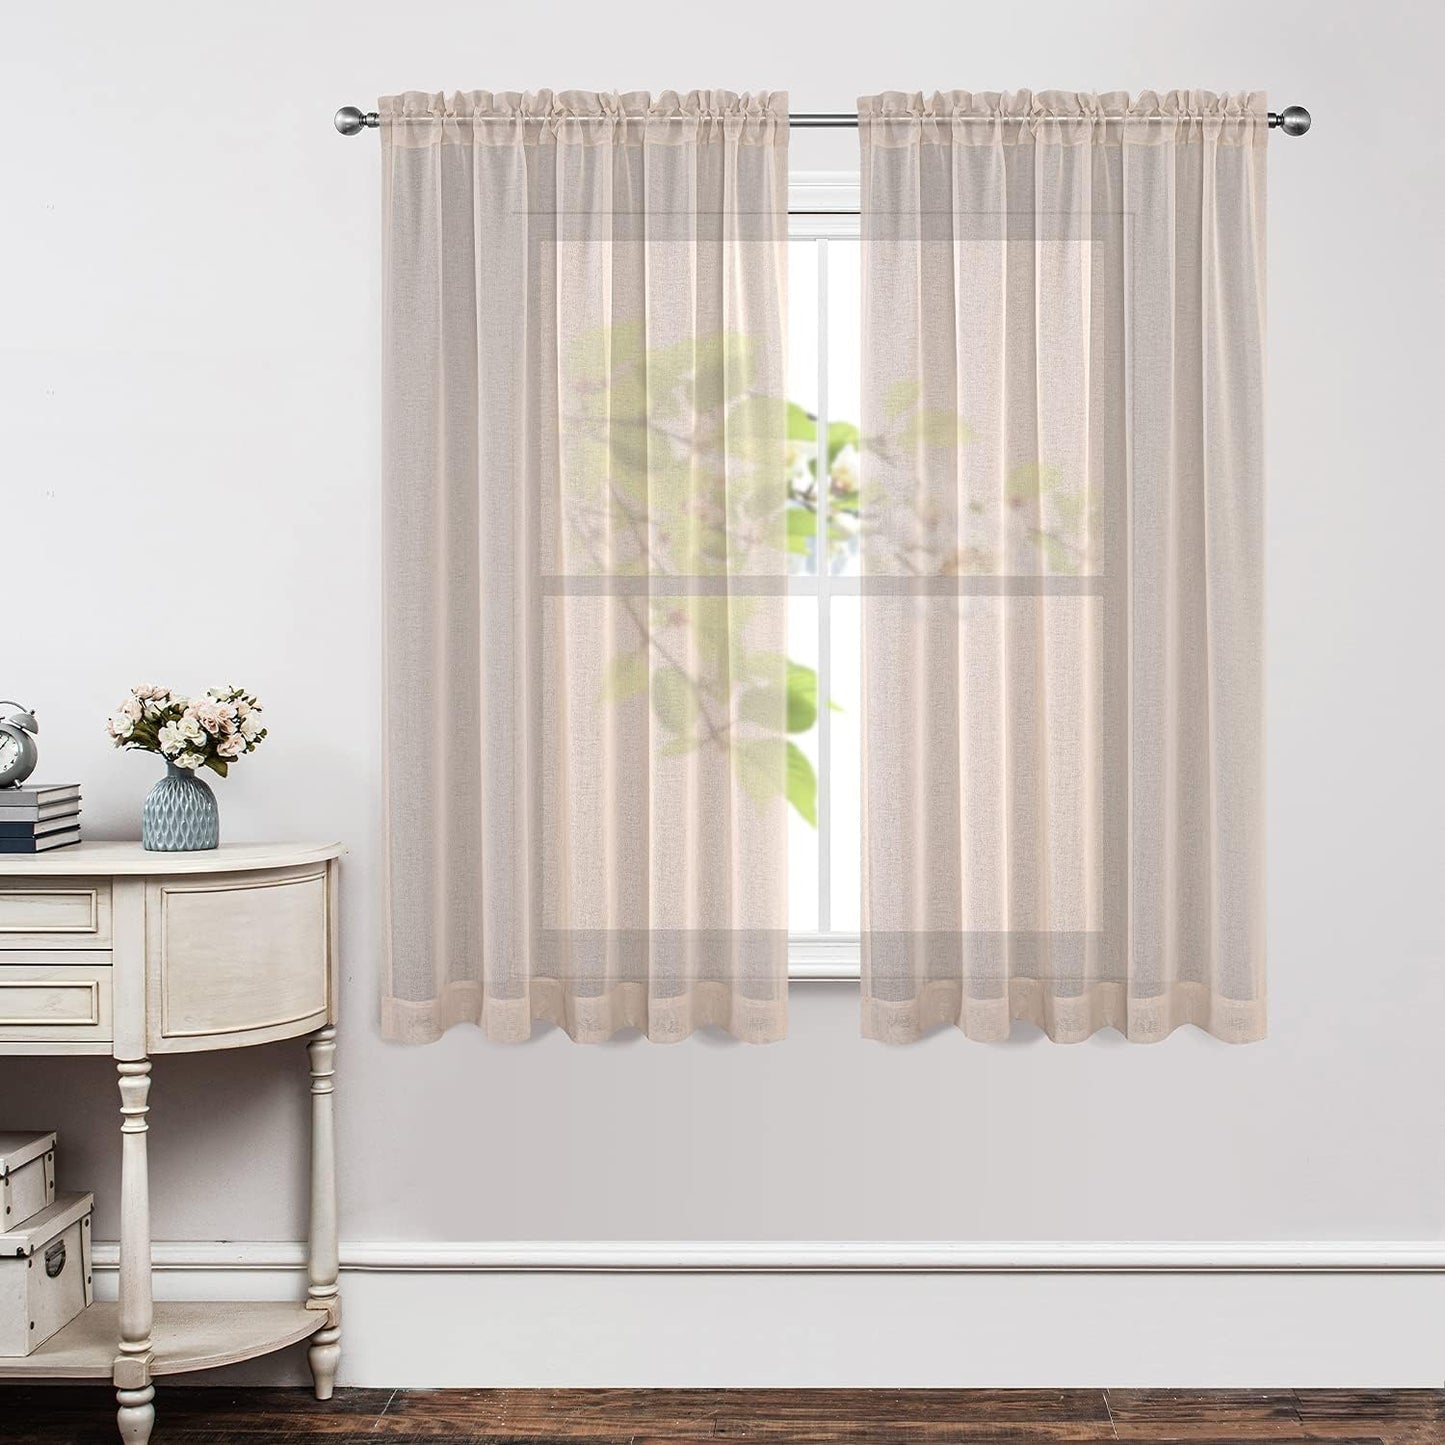 Joydeco White Sheer Curtains 63 Inch Length 2 Panels Set, Rod Pocket Long Sheer Curtains for Window Bedroom Living Room, Lightweight Semi Drape Panels for Yard Patio (54X63 Inch, off White)  Joydeco Linen 54W X 63L Inch X 2 Panels 